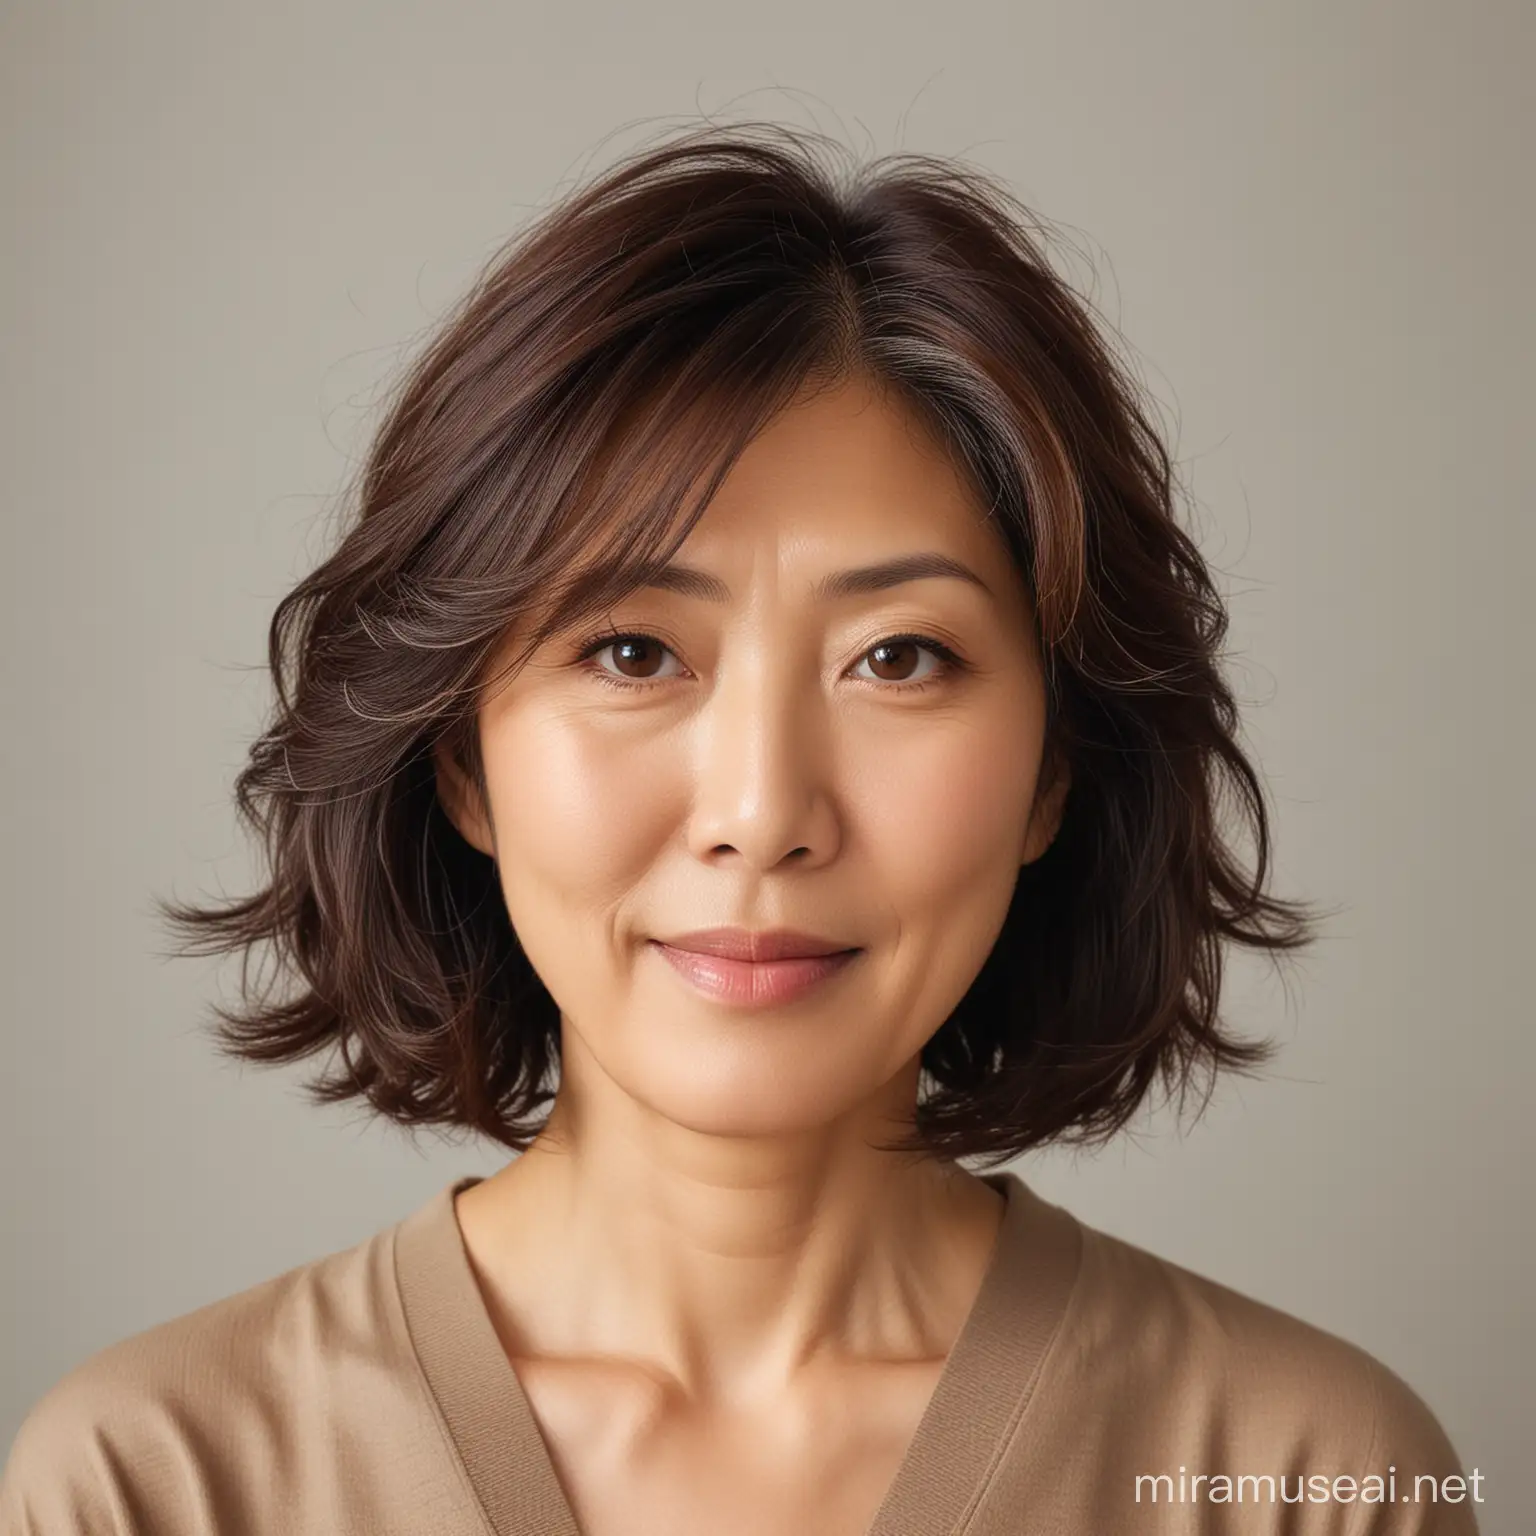 Japanese Woman with Wavy Dark Brown Hair and CaramelColored Eyes